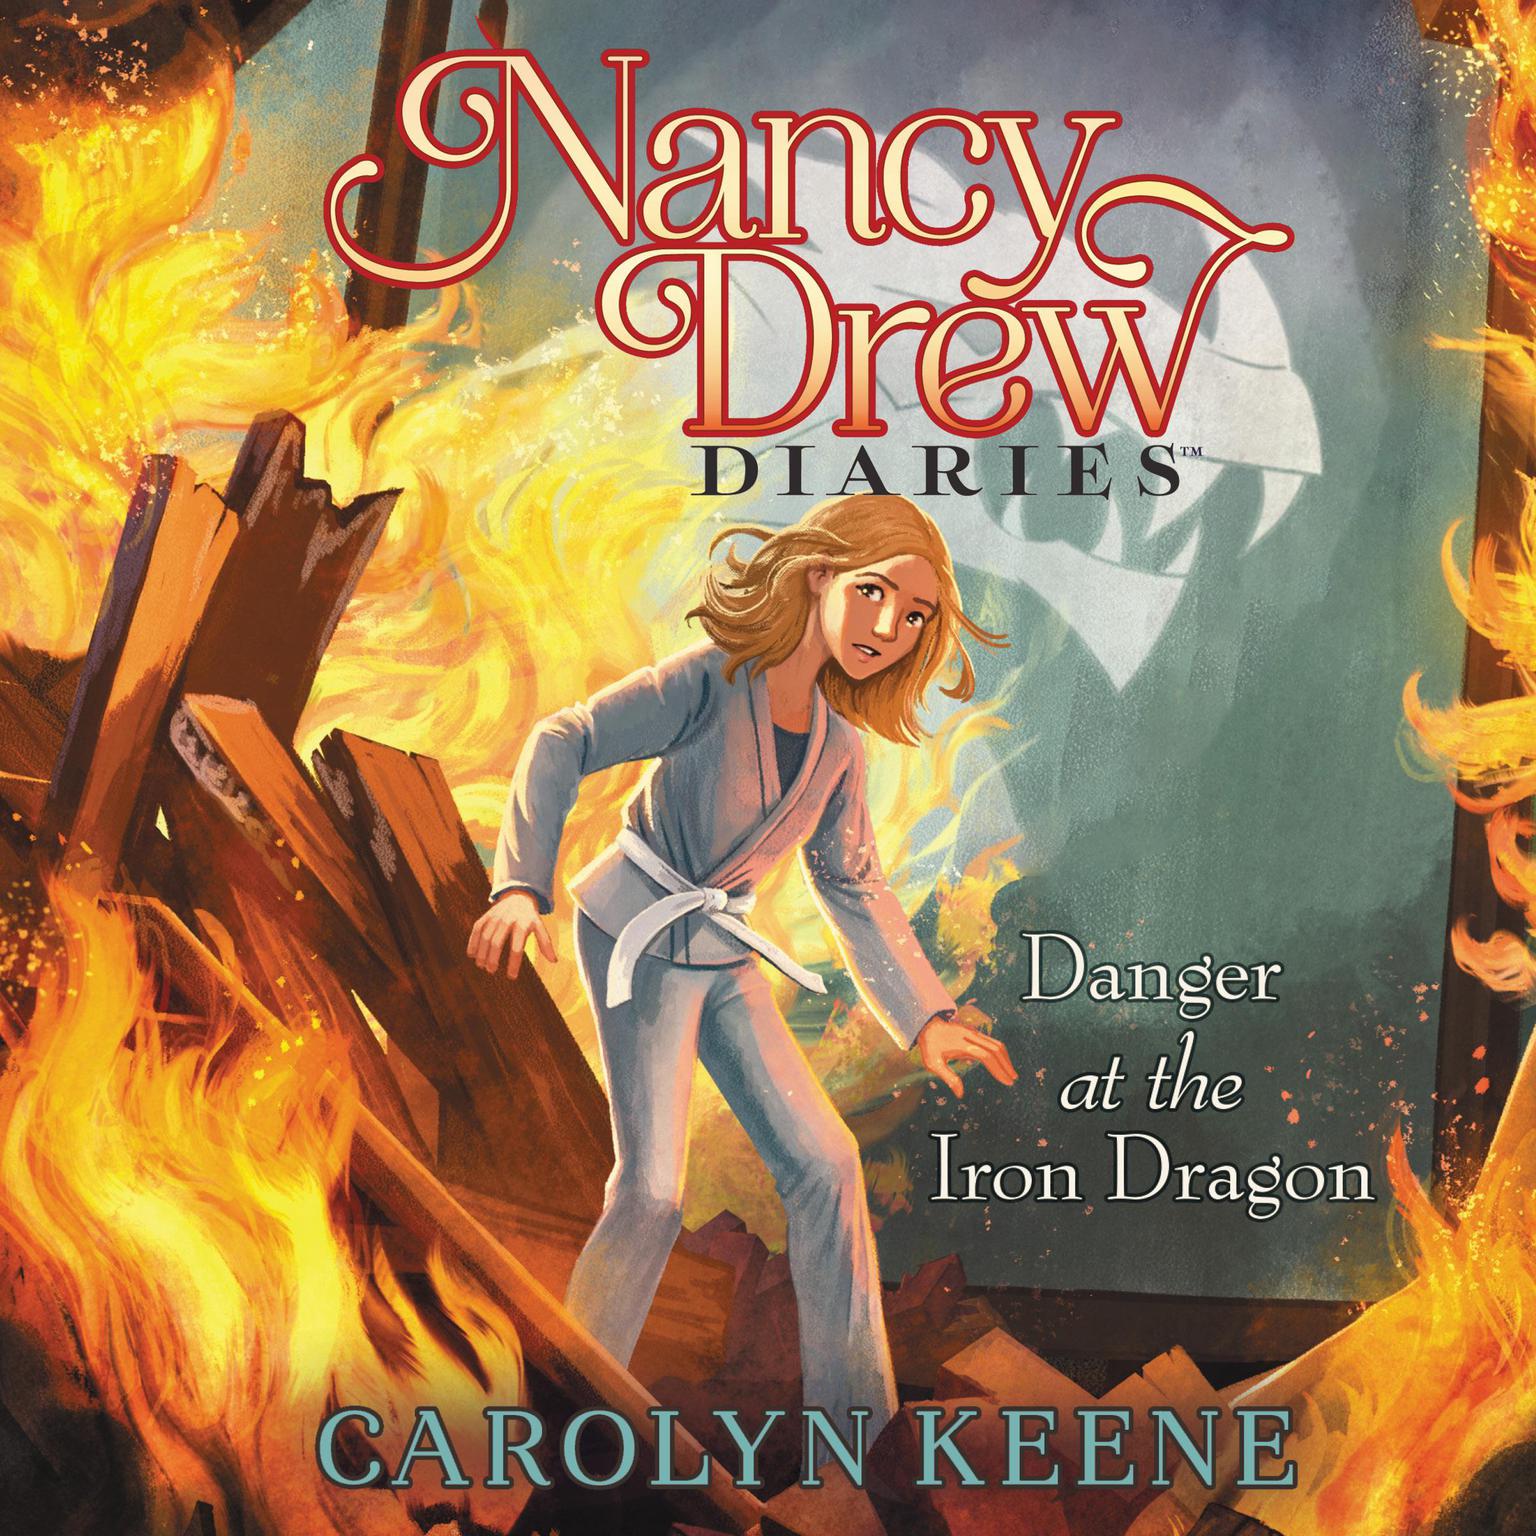 Danger at the Iron Dragon Audiobook, by Carolyn Keene